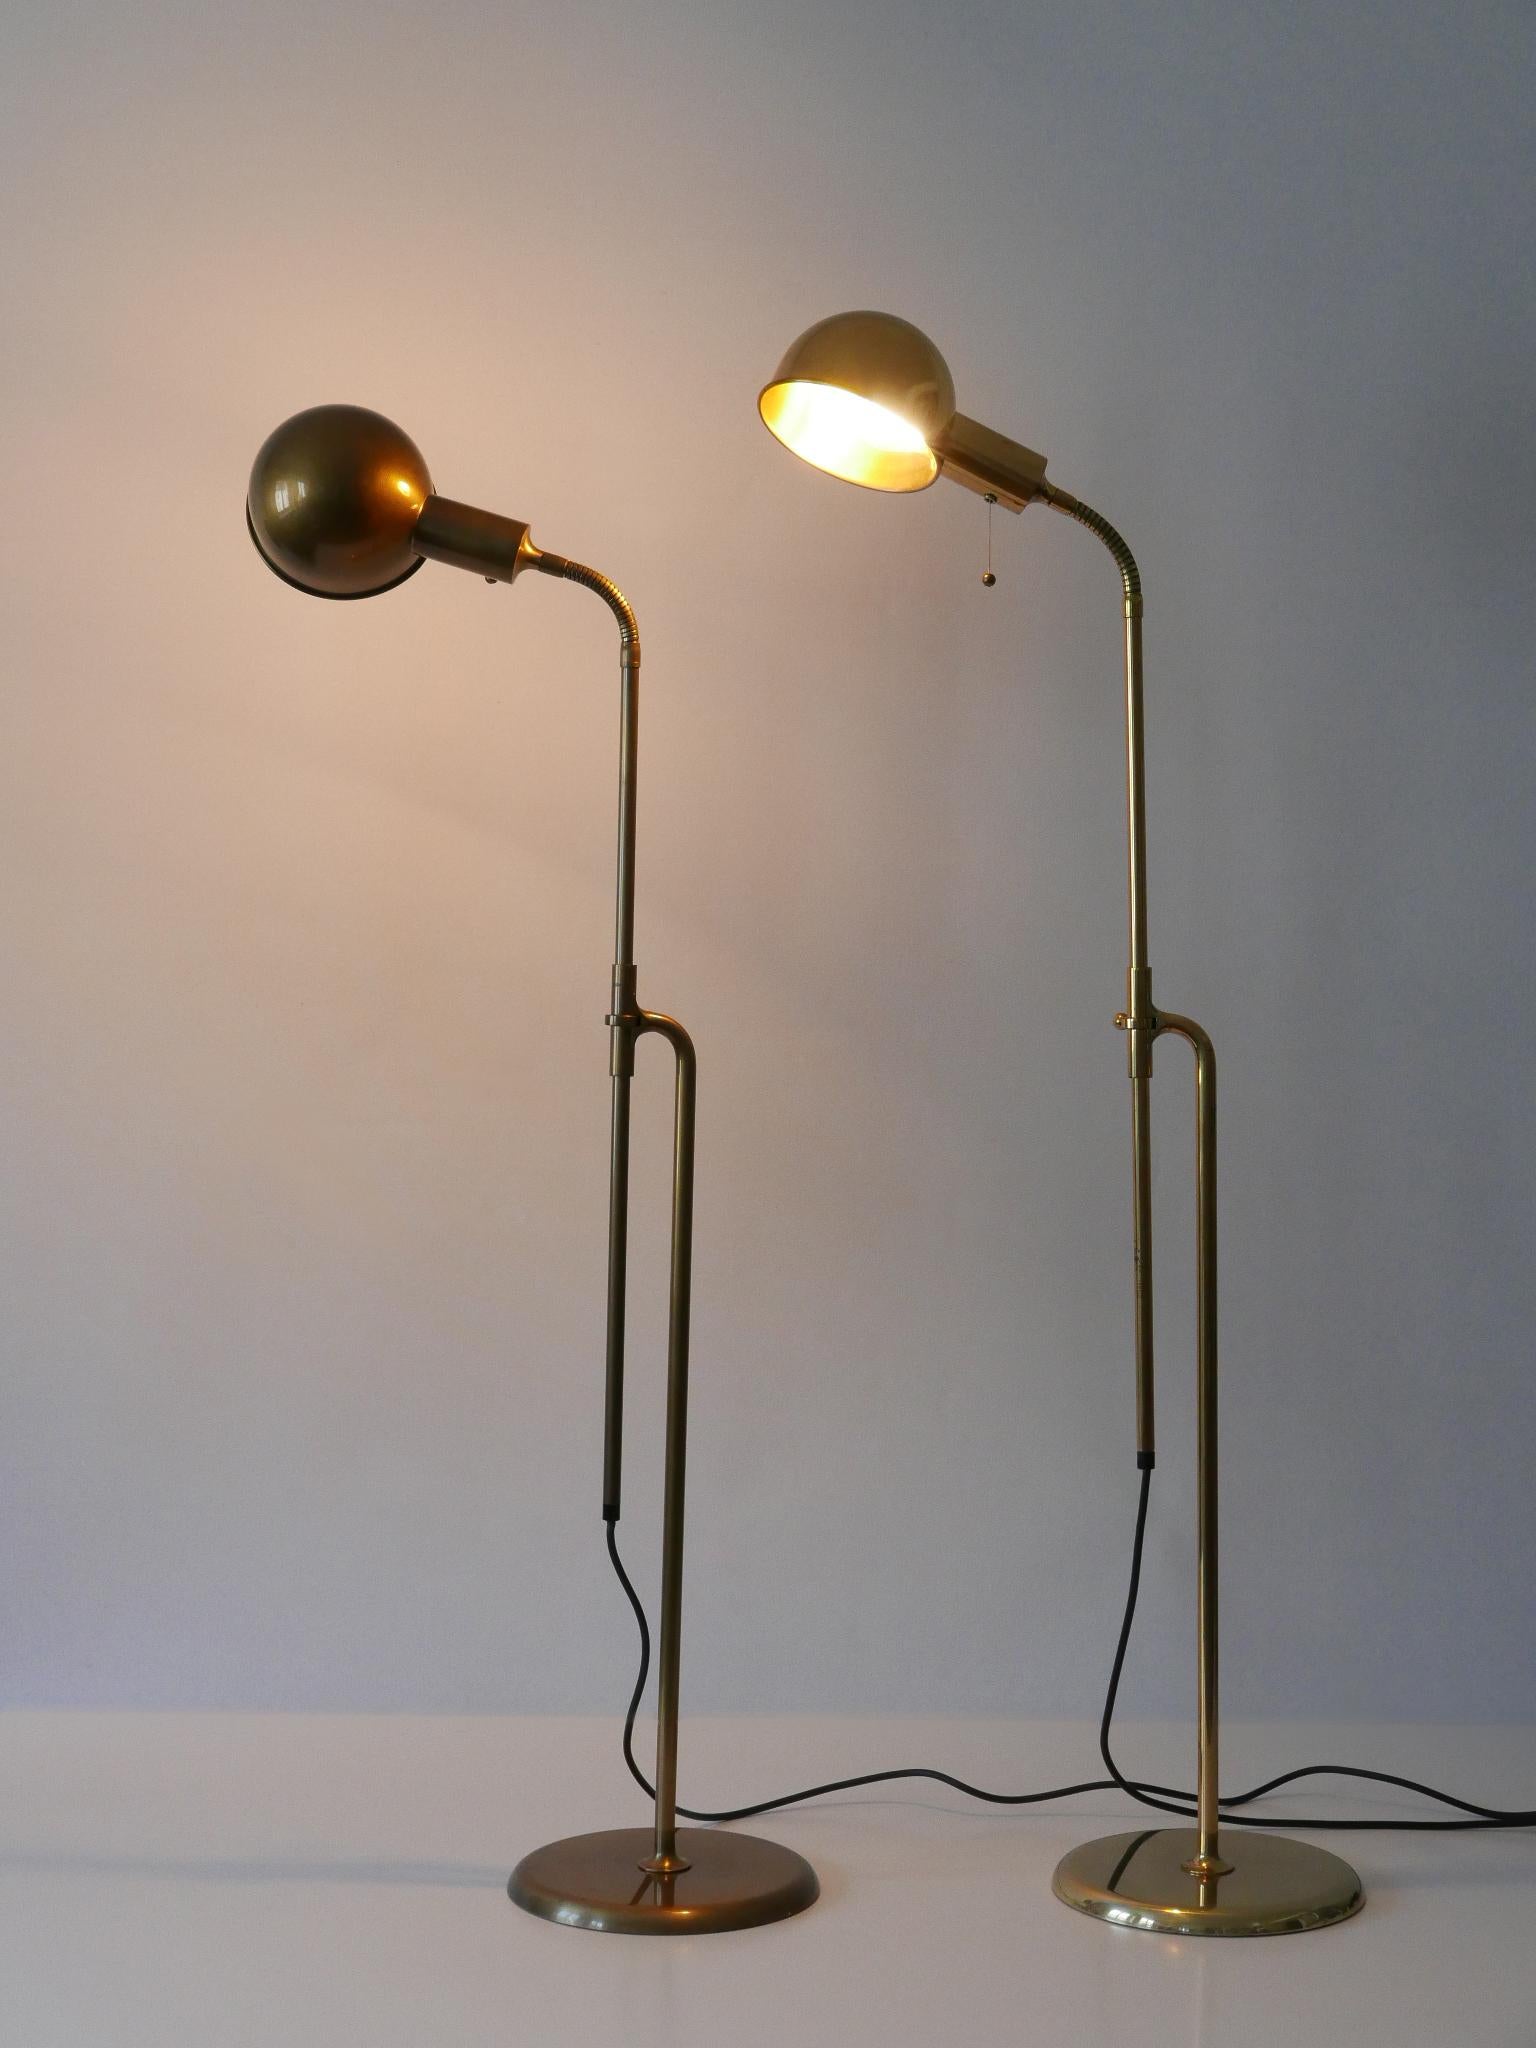 Set of Two Mid-Century Modern Reading Floor Lamps 'Bola' by Florian Schulz 1970s For Sale 6